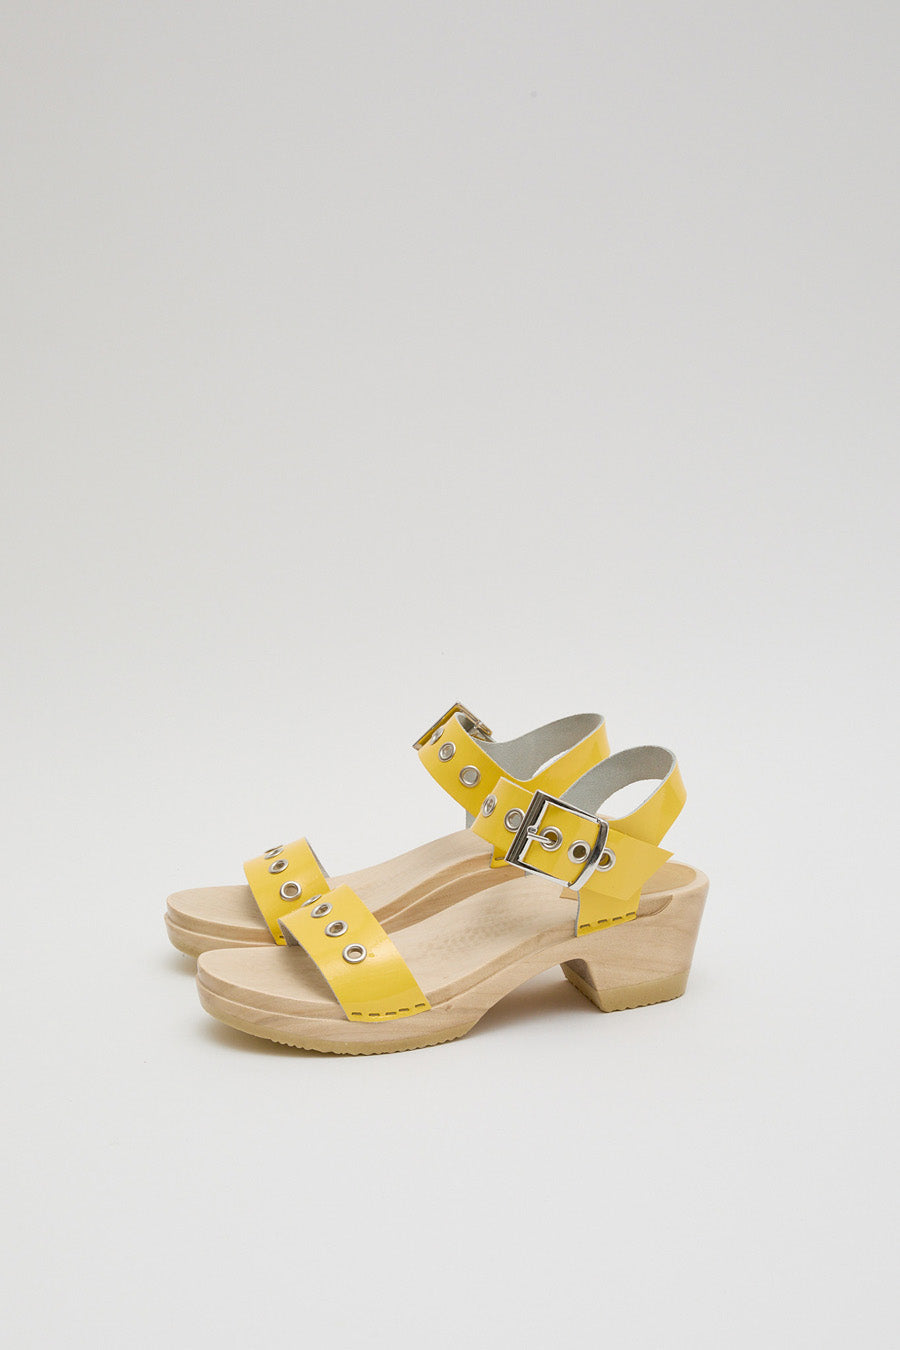 No.6 Two Strap Clog on Mid Heel in Yellow Patent with Eyelets